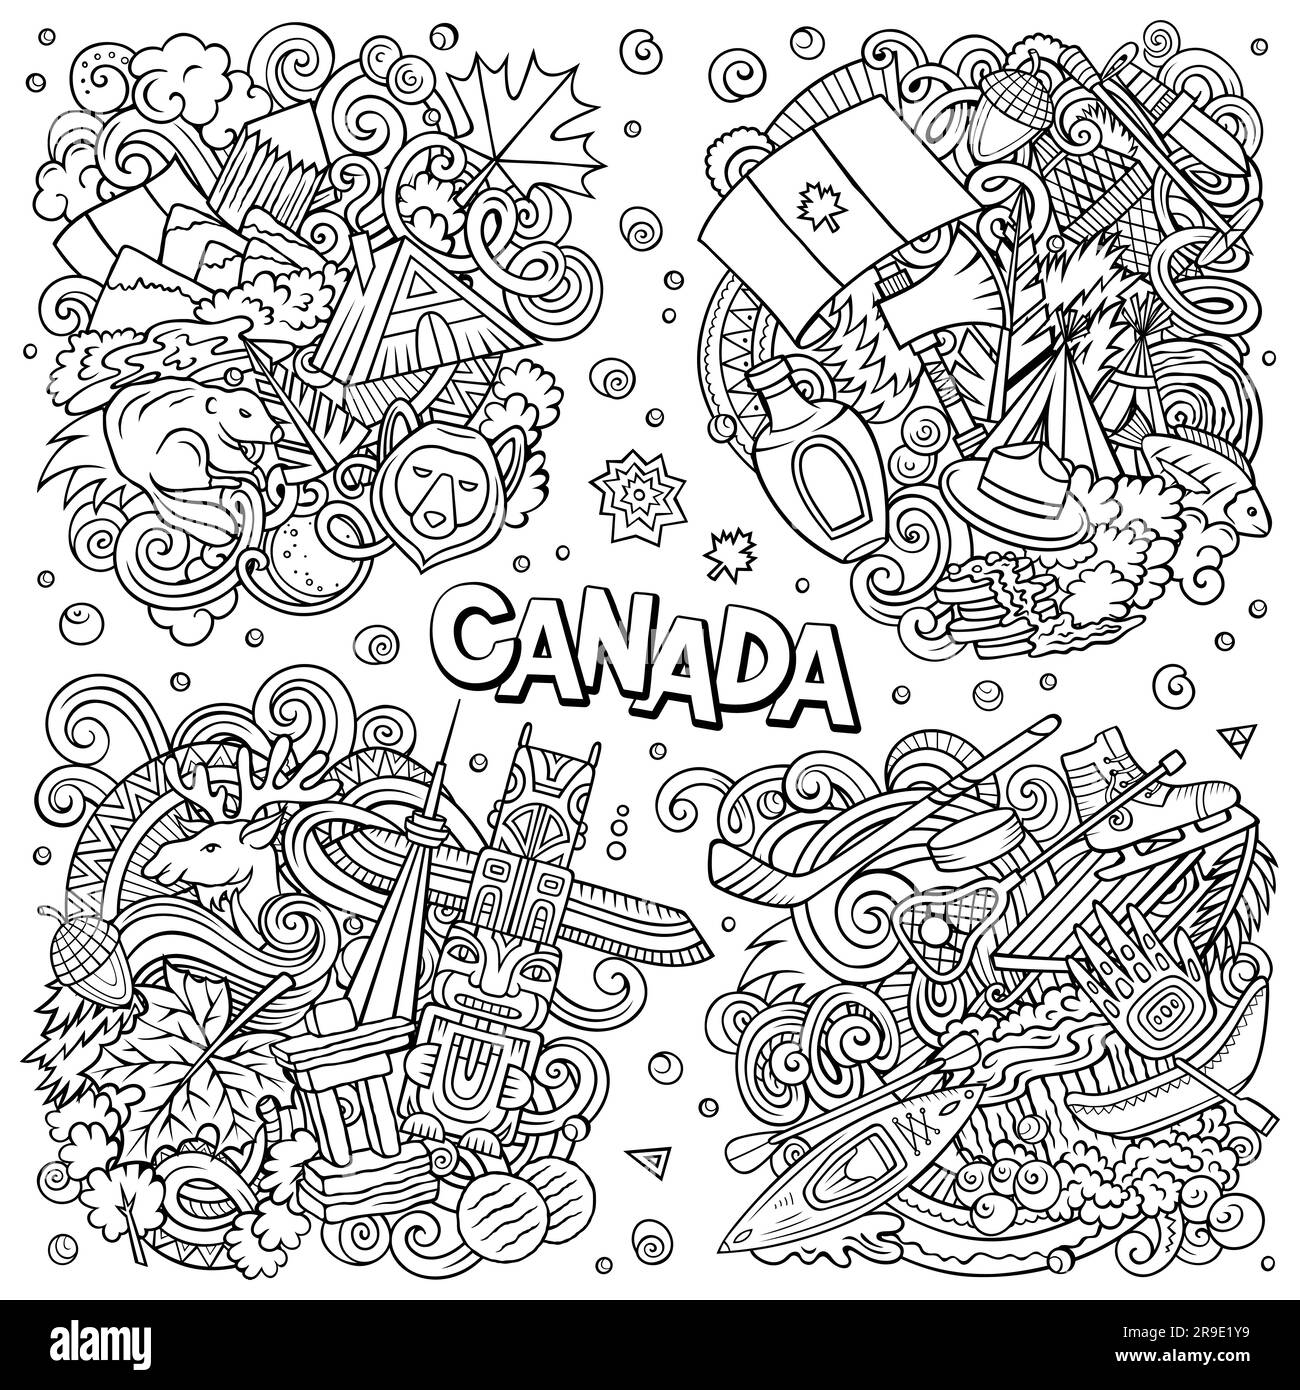 Canada cartoon vector doodle designs set. Sketchy detailed compositions with lot of canadian objects and symbols. Stock Vector